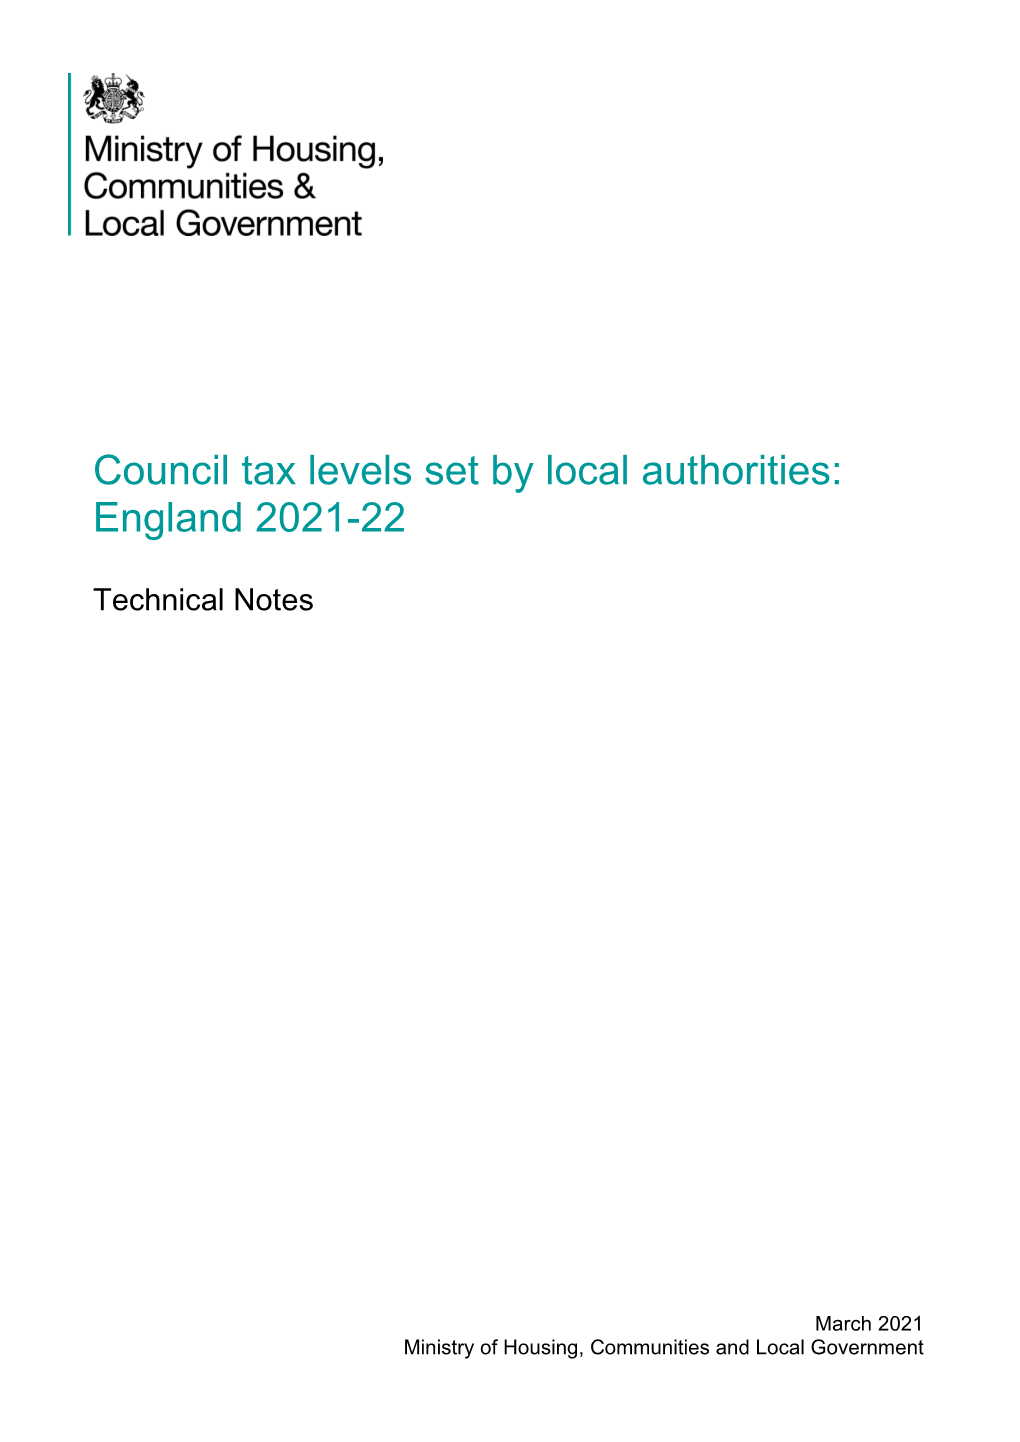 Council Tax Levels Set by Local Authorities in England 2021 to 2022